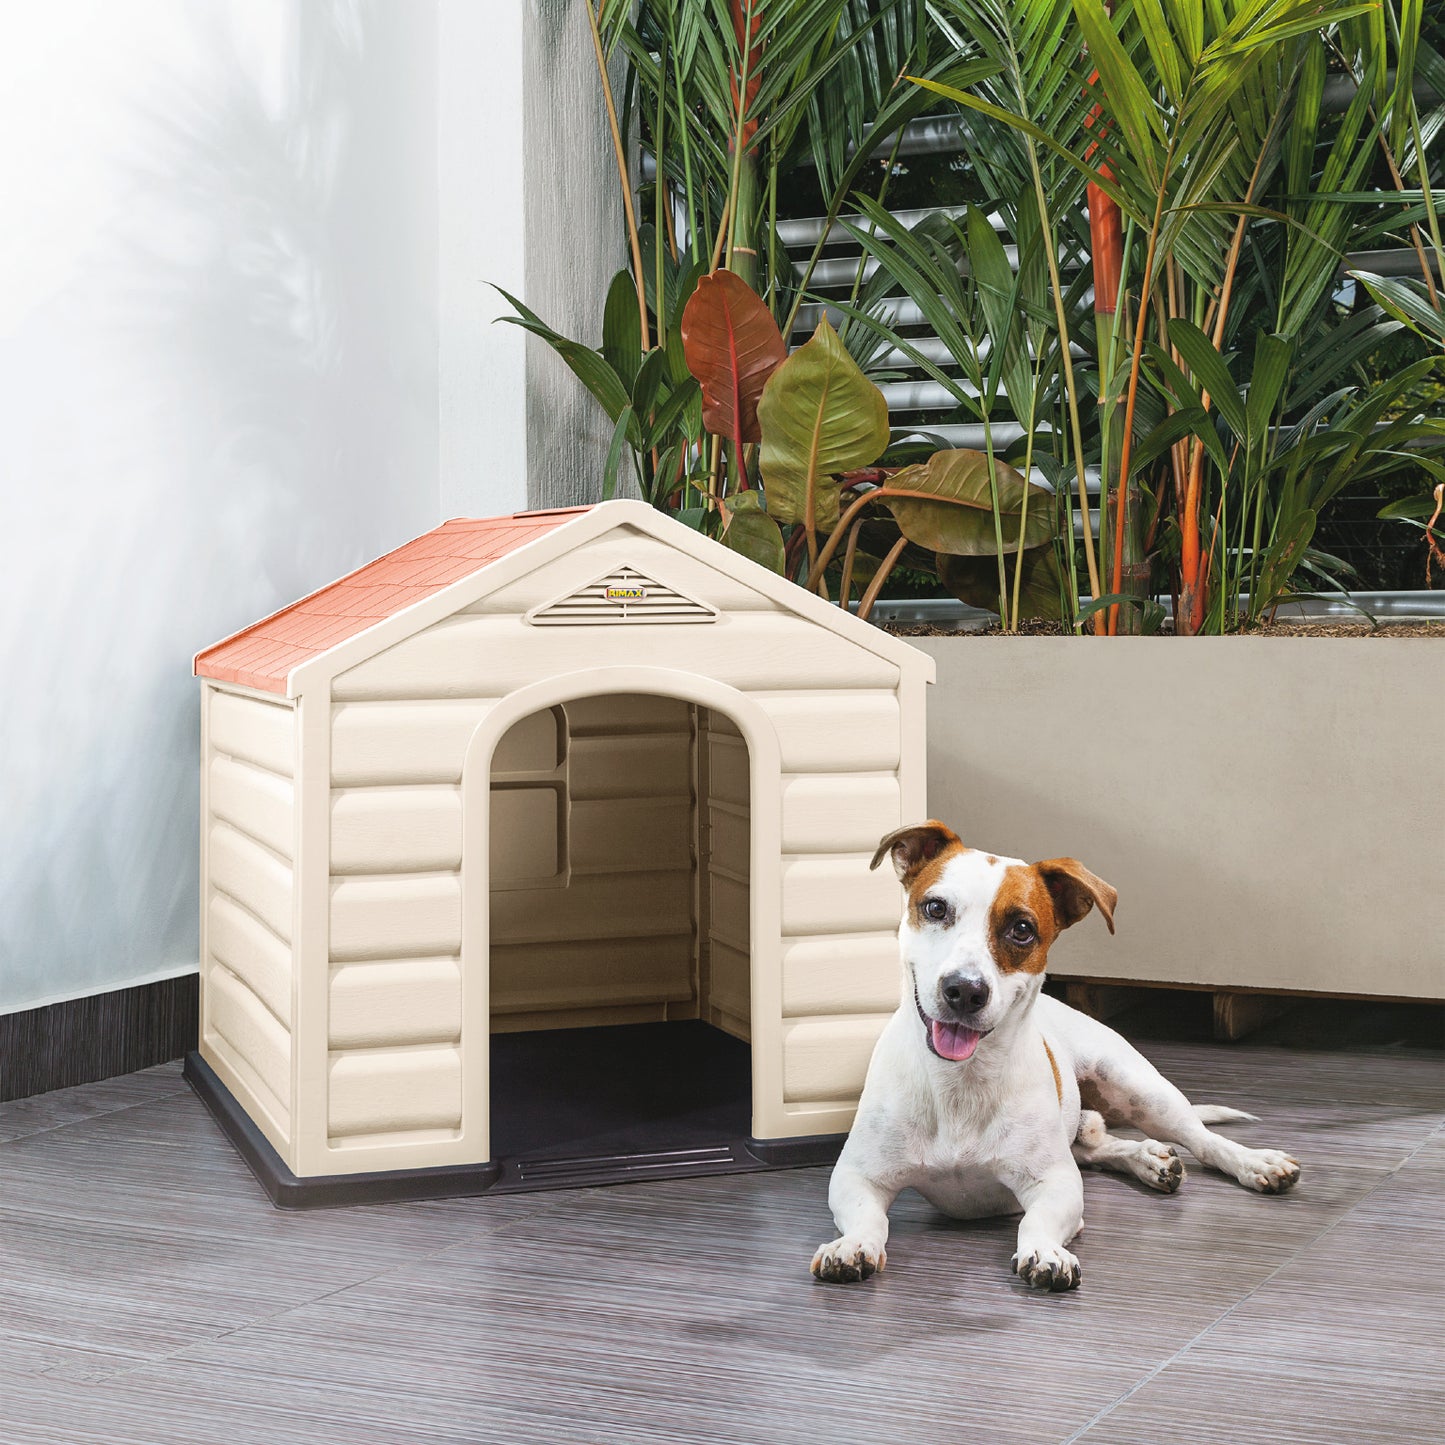 Rimax Resin Dog House for Small Breeds, Taupe, 23" H X 24" W X 26" D